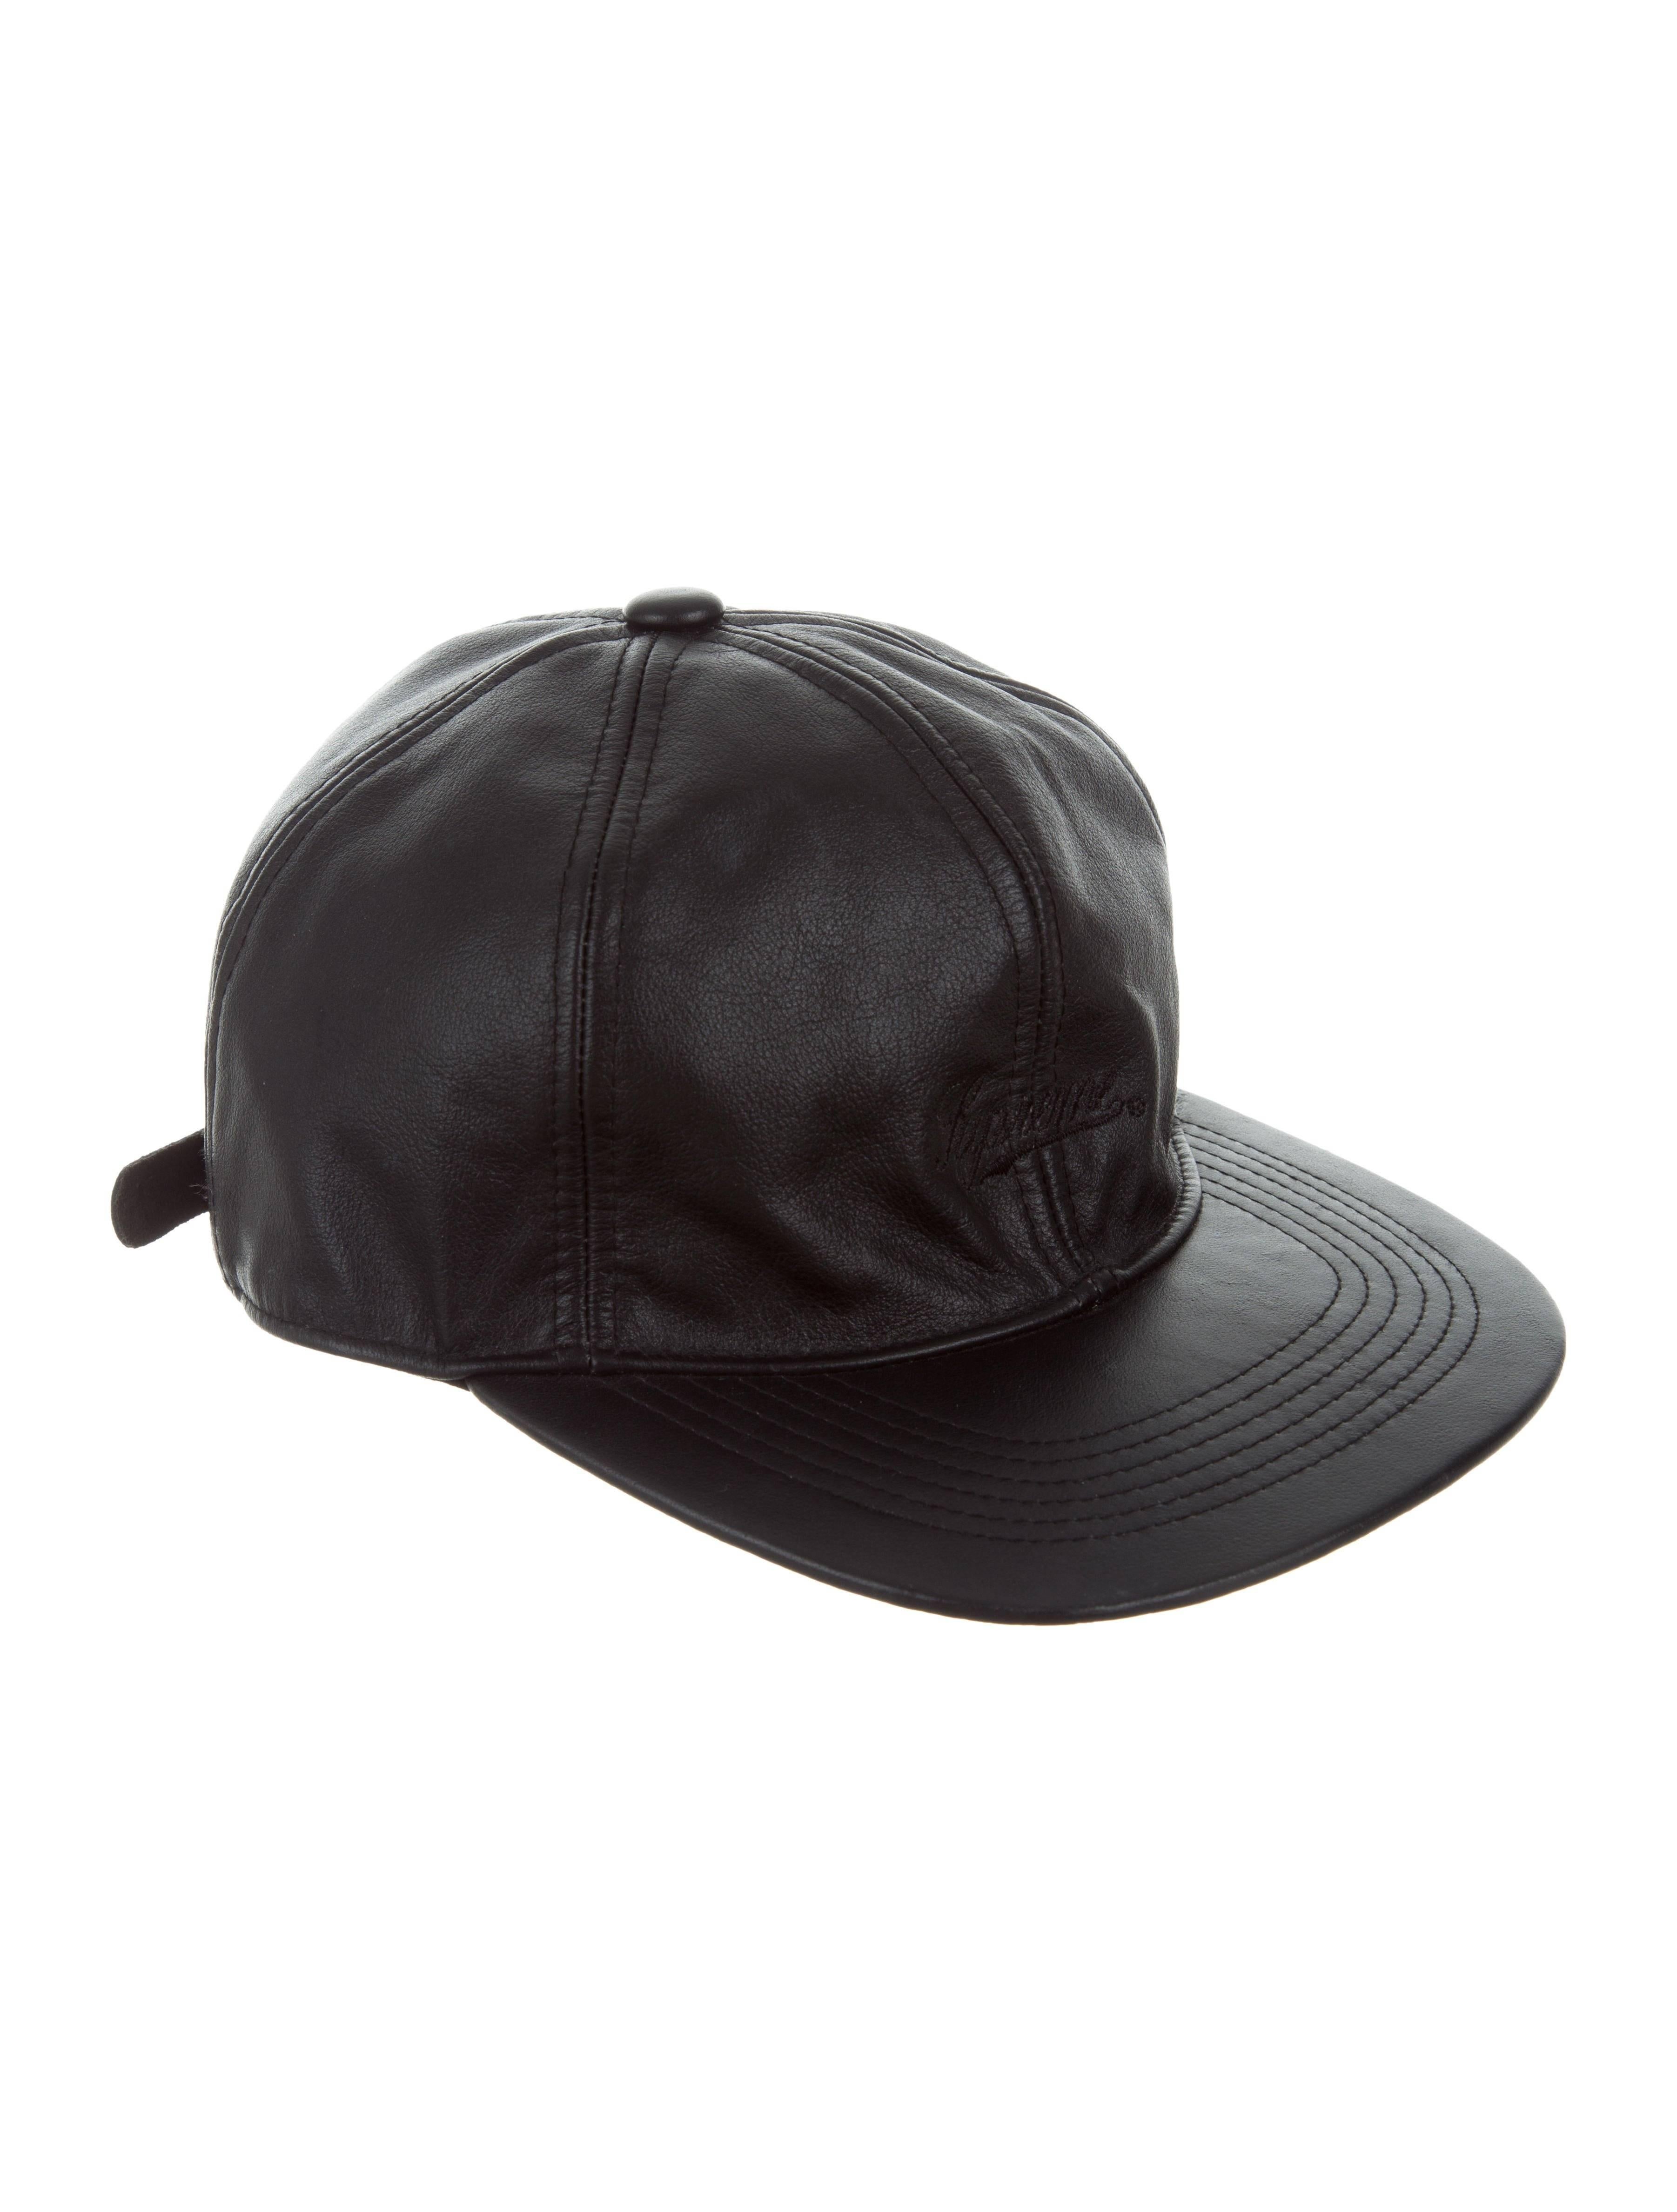 CURATOR'S NOTES

Supreme Black Leather Men's Women's Baseball Cap Hat  

Leather
Embroidery
Clamp closure
Brim 2.75